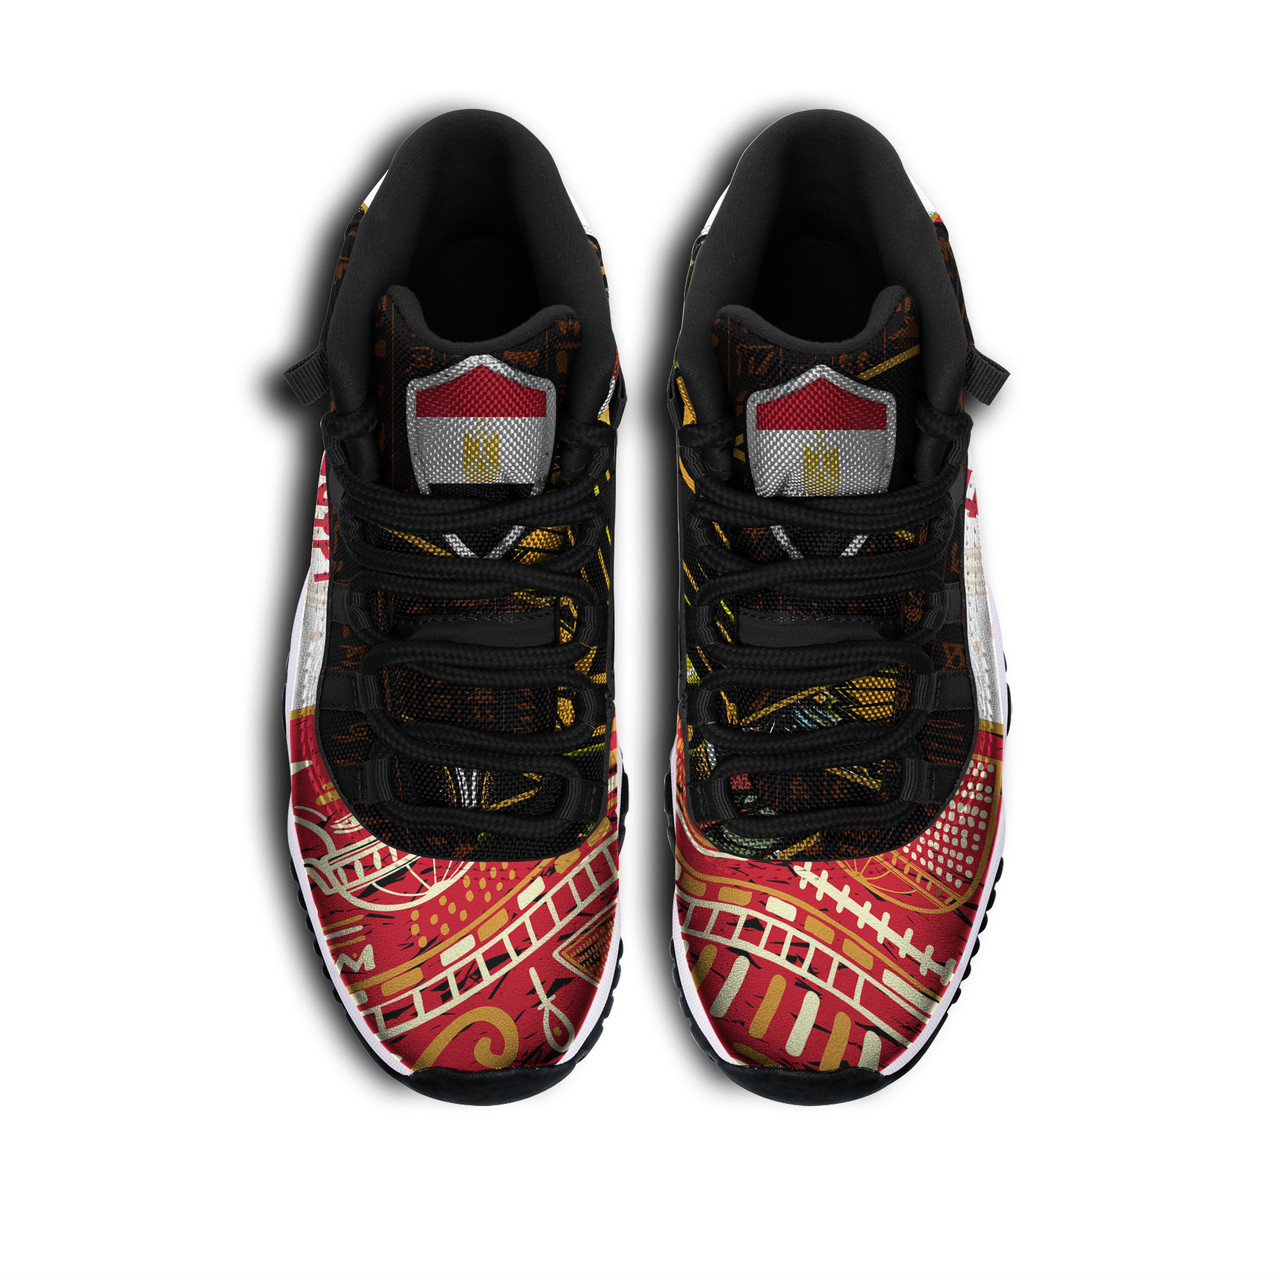 Egypt High Top Basketball Shoes J 11 - Egypt Revolution Day With Egyptian Ankh, Sacred Black Cat And Ancient Hieroglyphs High Top Basketball Shoes J 11